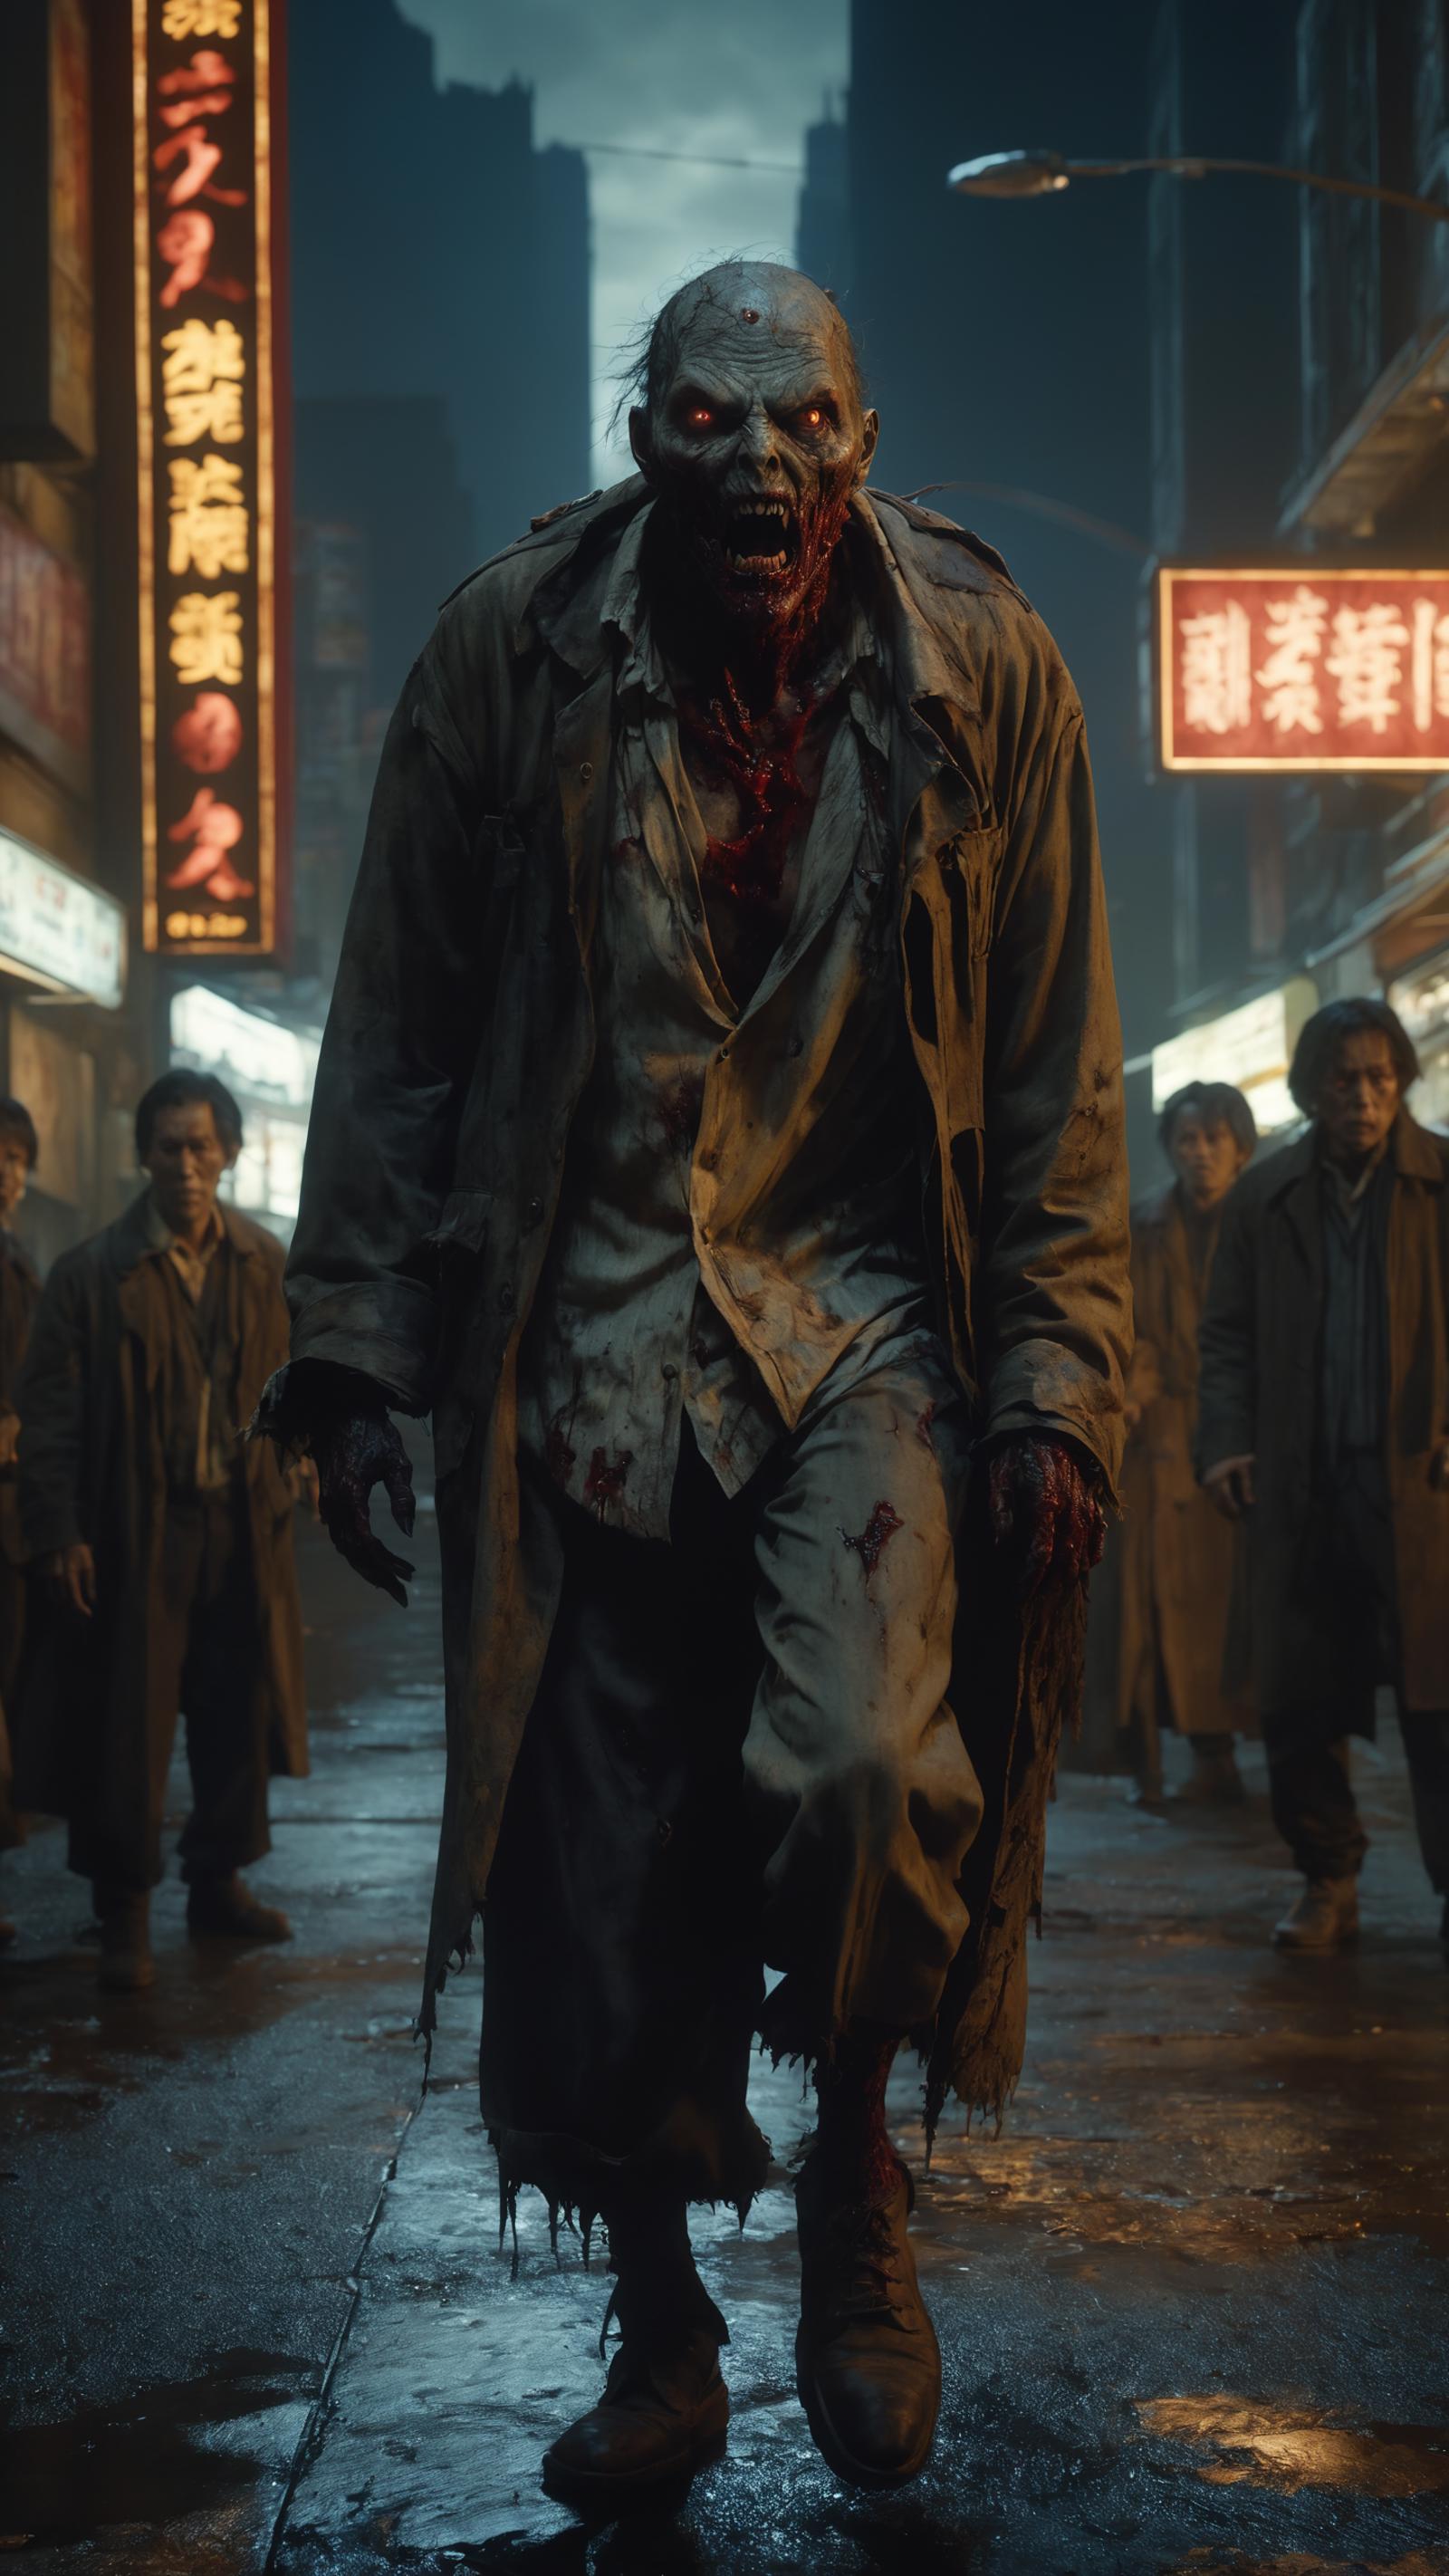 A group of people walking down a street with one man wearing a long trench coat and a bloody mouth.